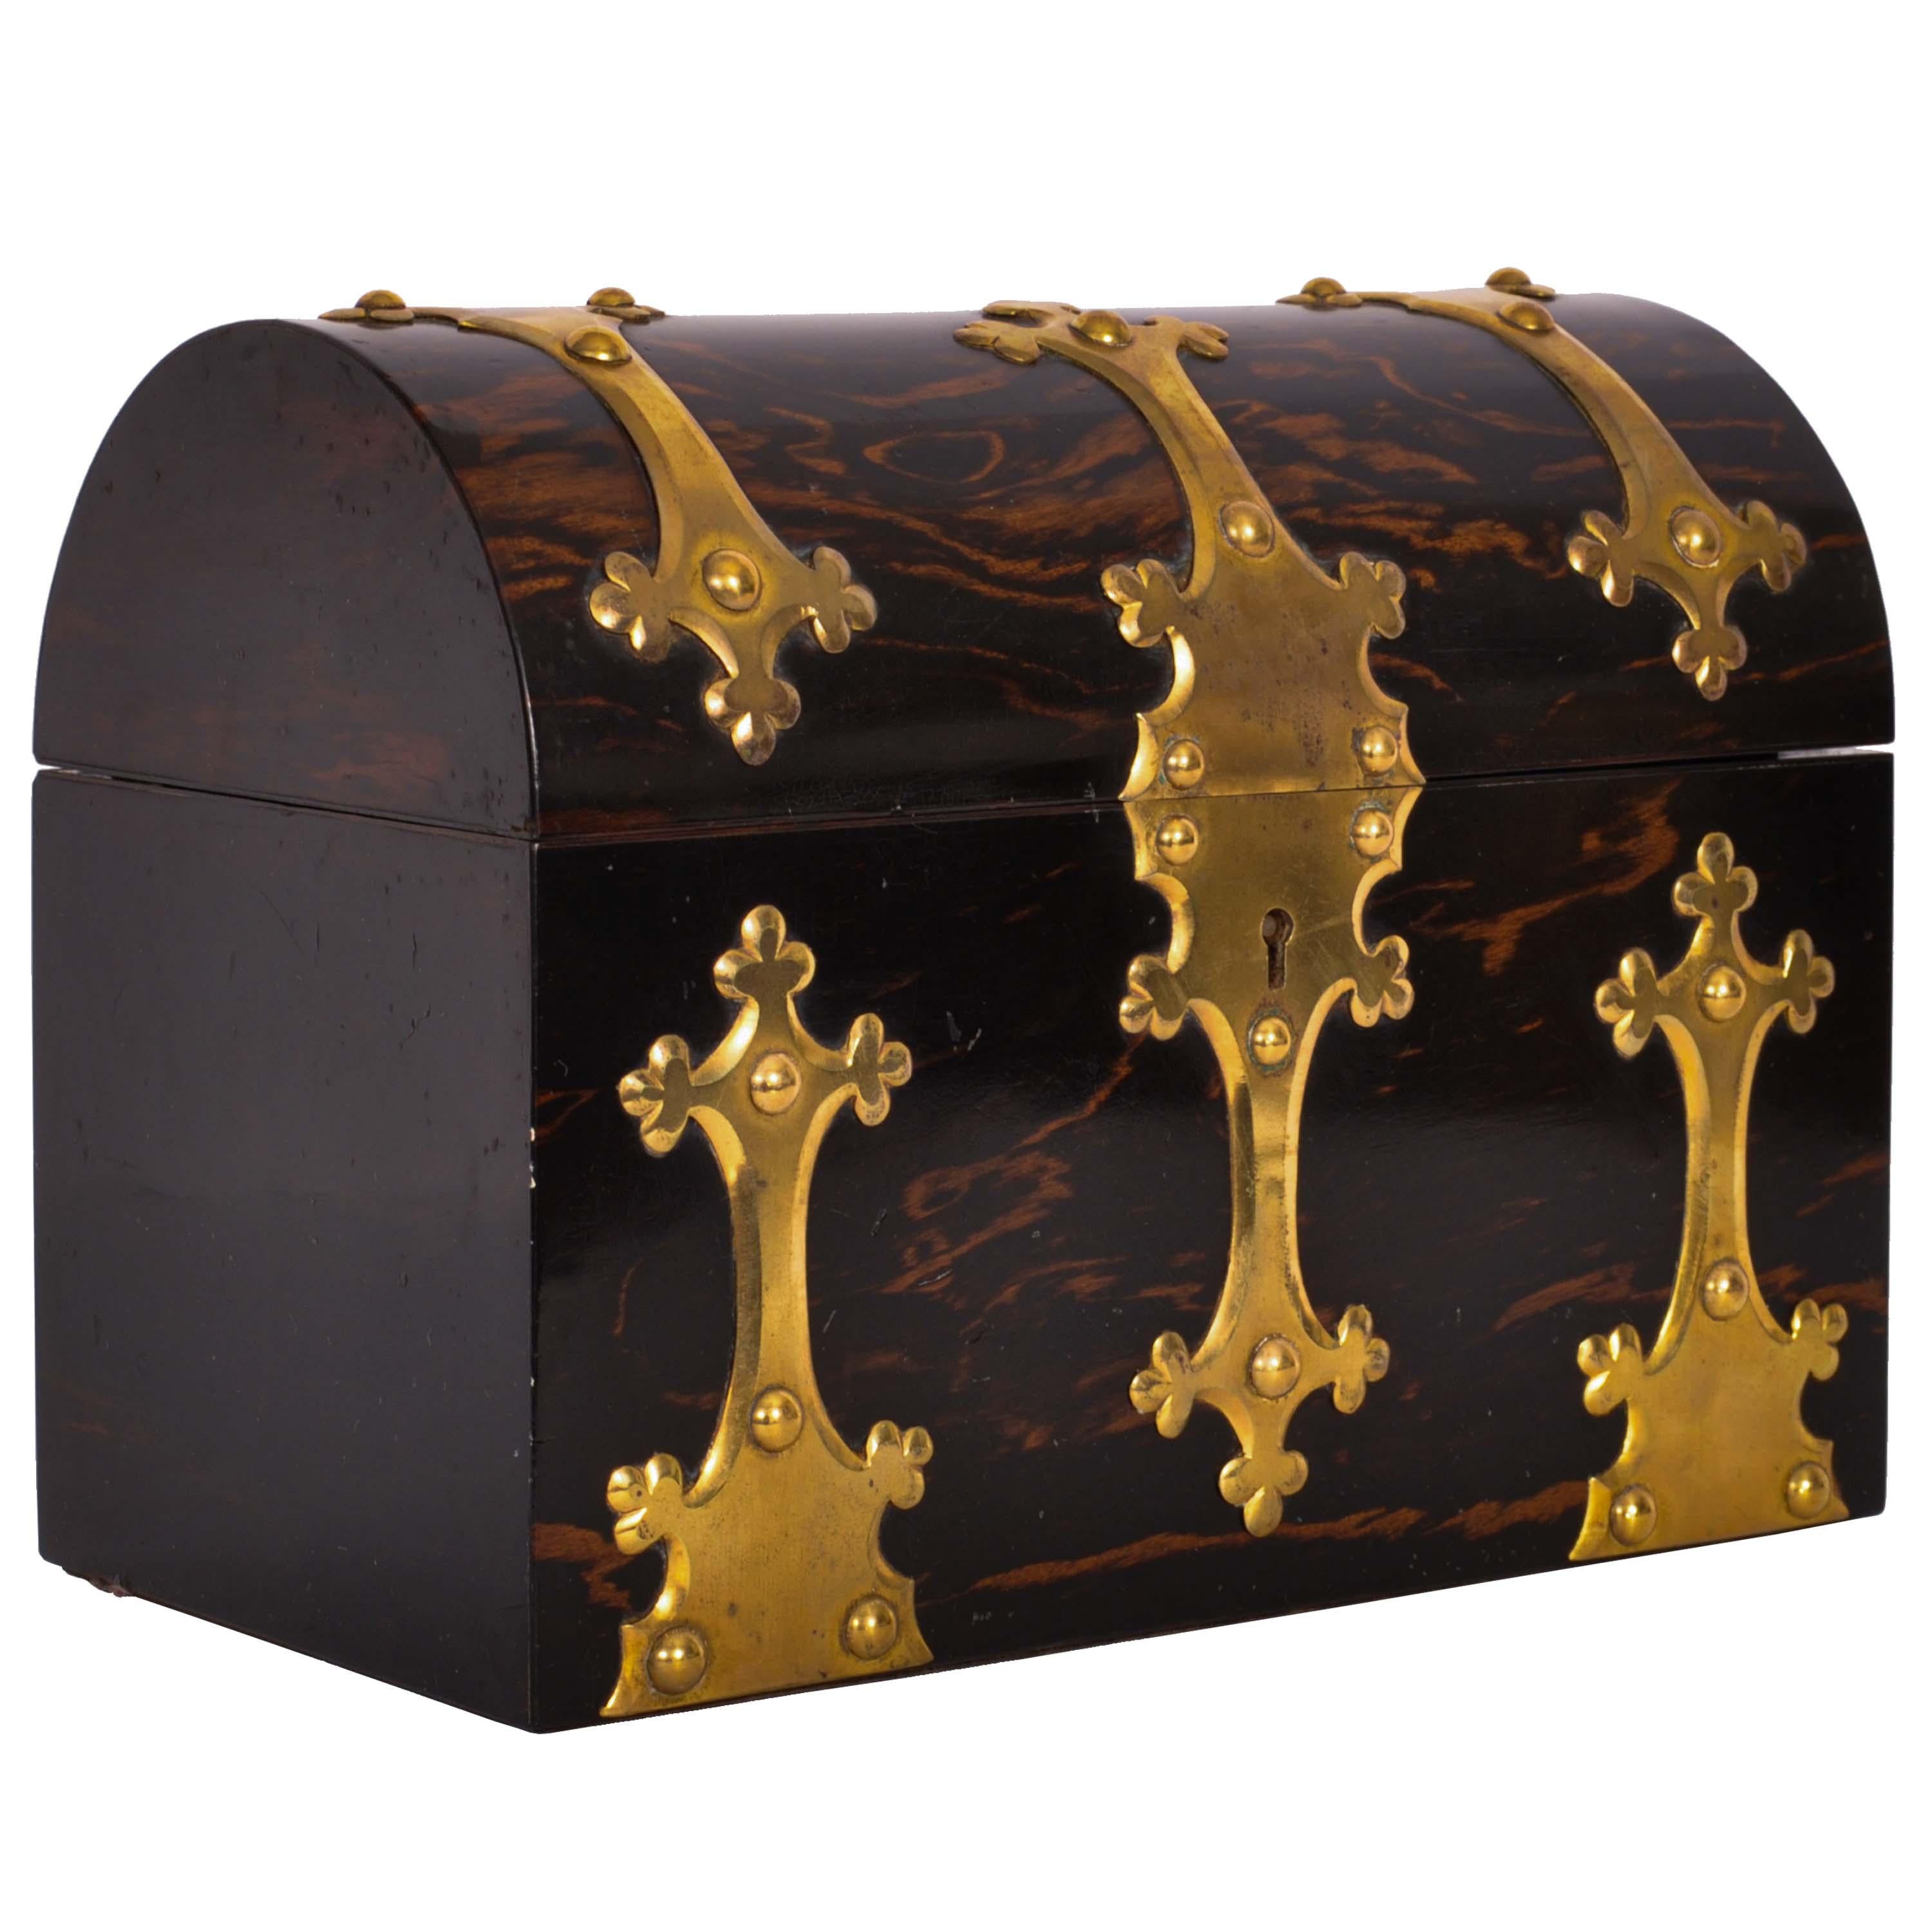 A fine antique Gothic Revival Coromandel (Calamander) domed top stationery box, Toulmin & Gale, London, circa 1865.

The box made from the exotic hardwood known as Coromandel, from Sri lanka & India, sadly now logged to extinction. The box being in